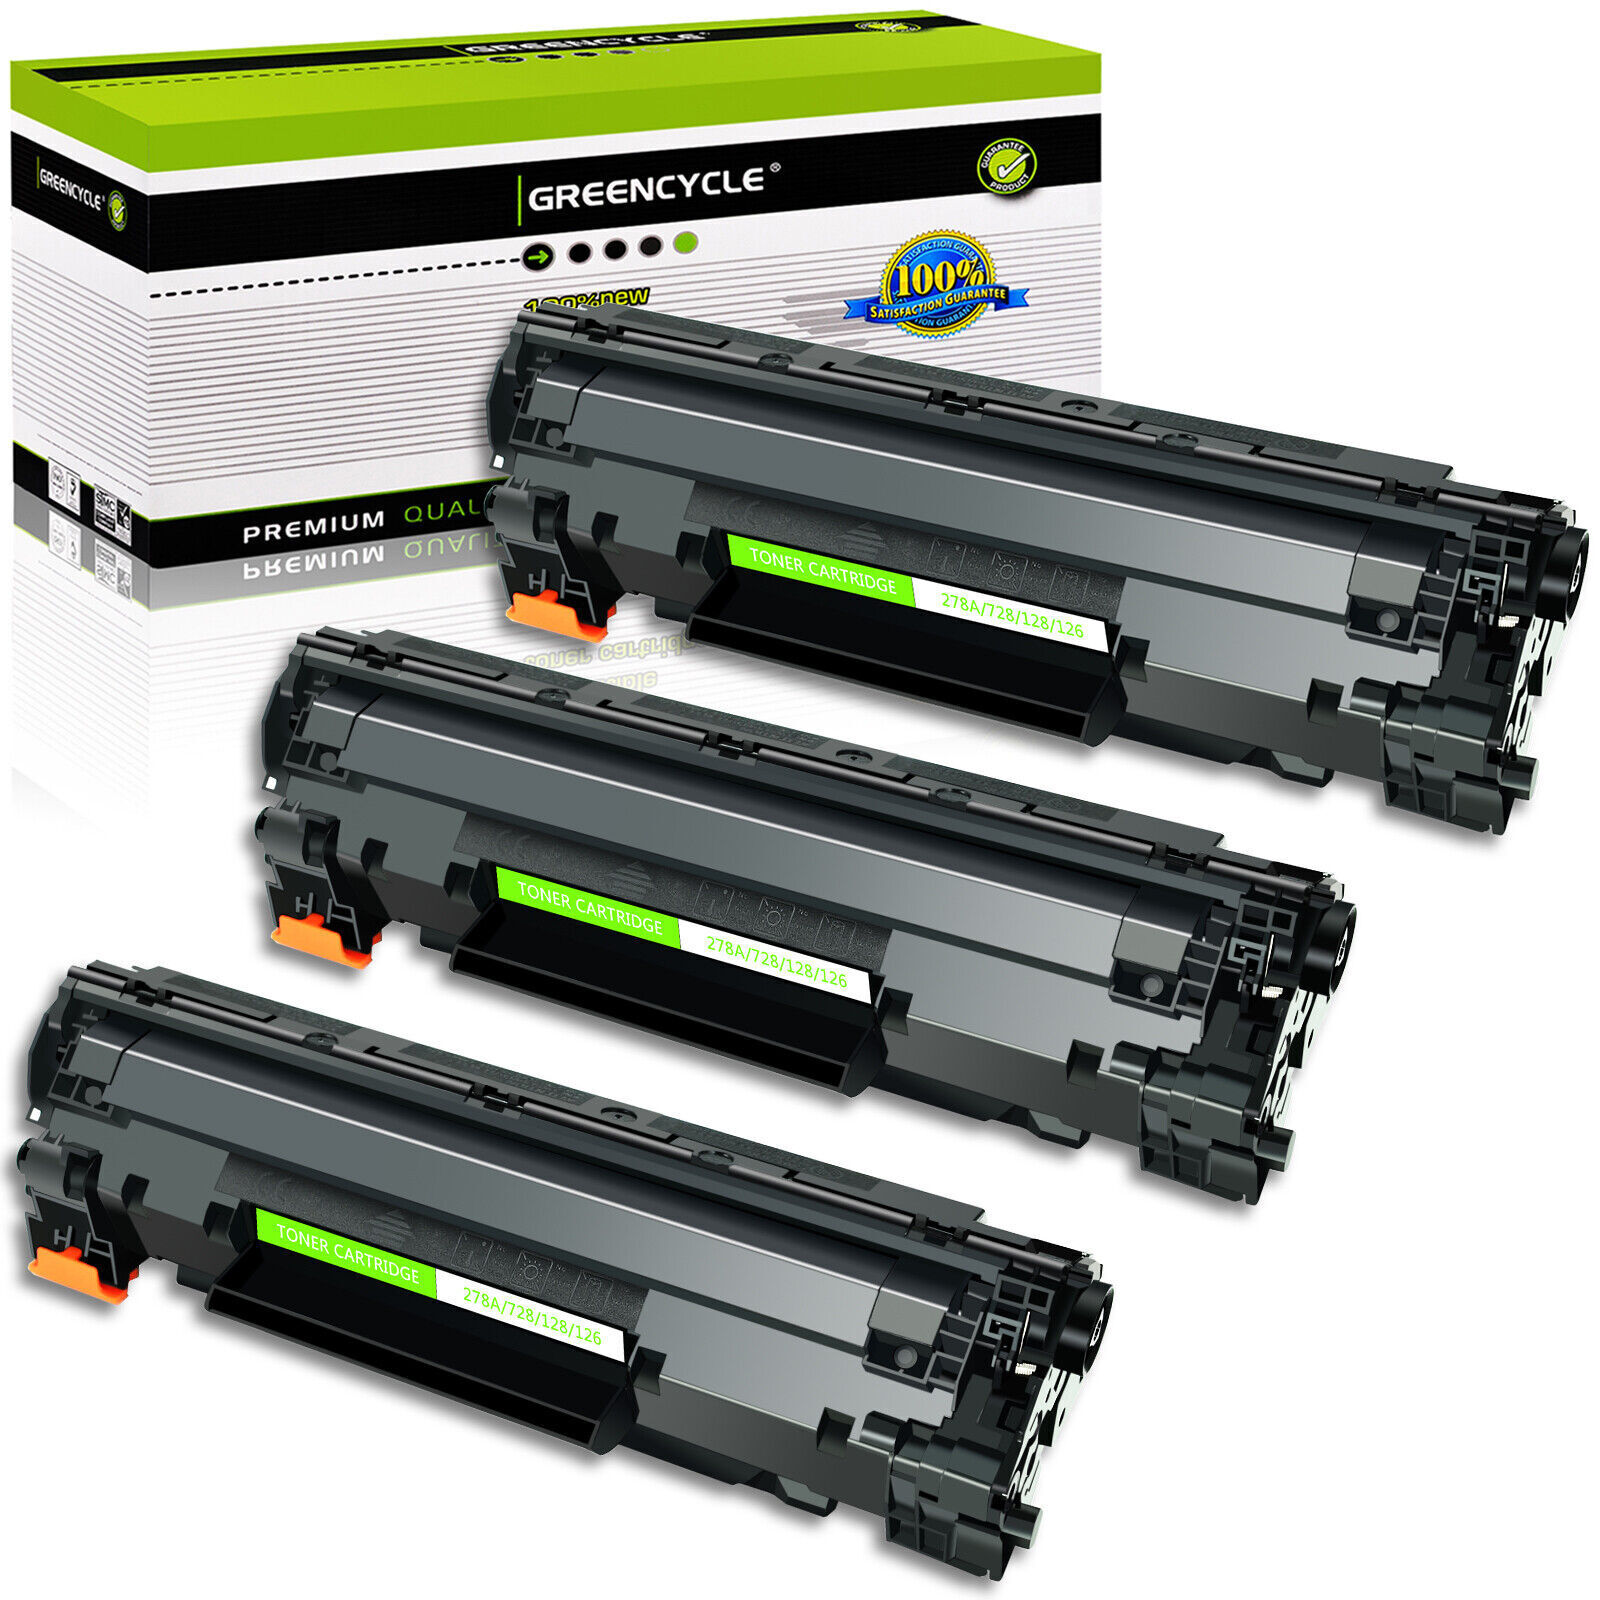 3PK Greencycle Compatible Toner Cartridge For Canon 128 CRG128 Faxphone L100/190